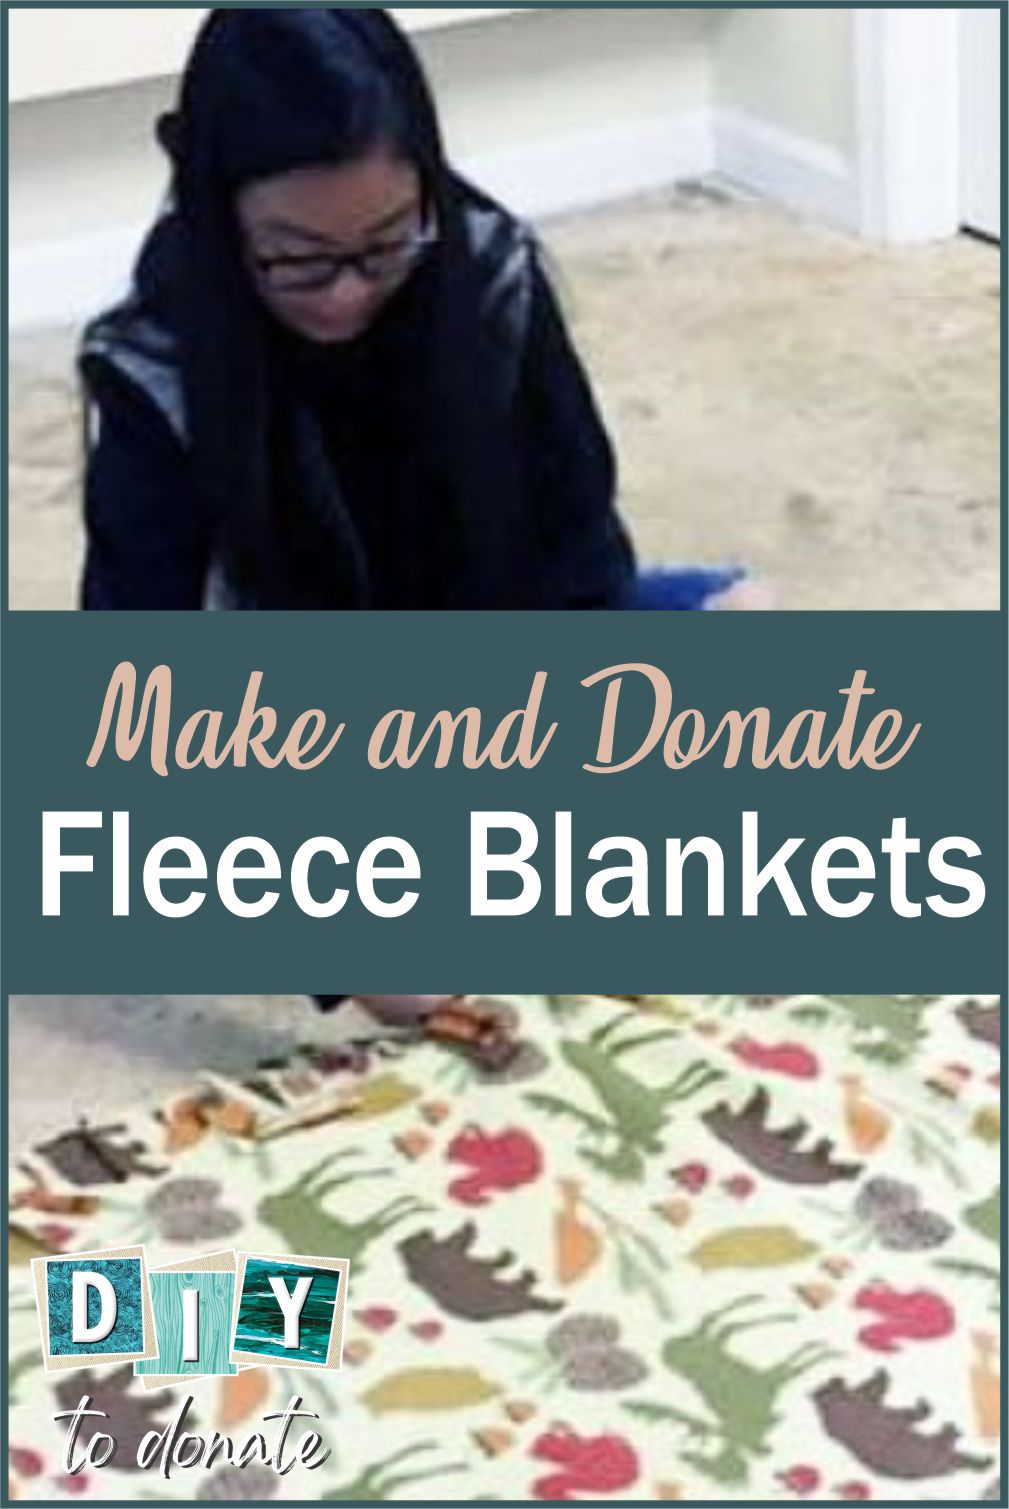 Find out how to make no-sew fleece tied blankets and where to donate them. Younger kids can participate in the tying parts as well! #diytodonate #blankets #notieblankets #donate #givingback #shelters #communityservice #community